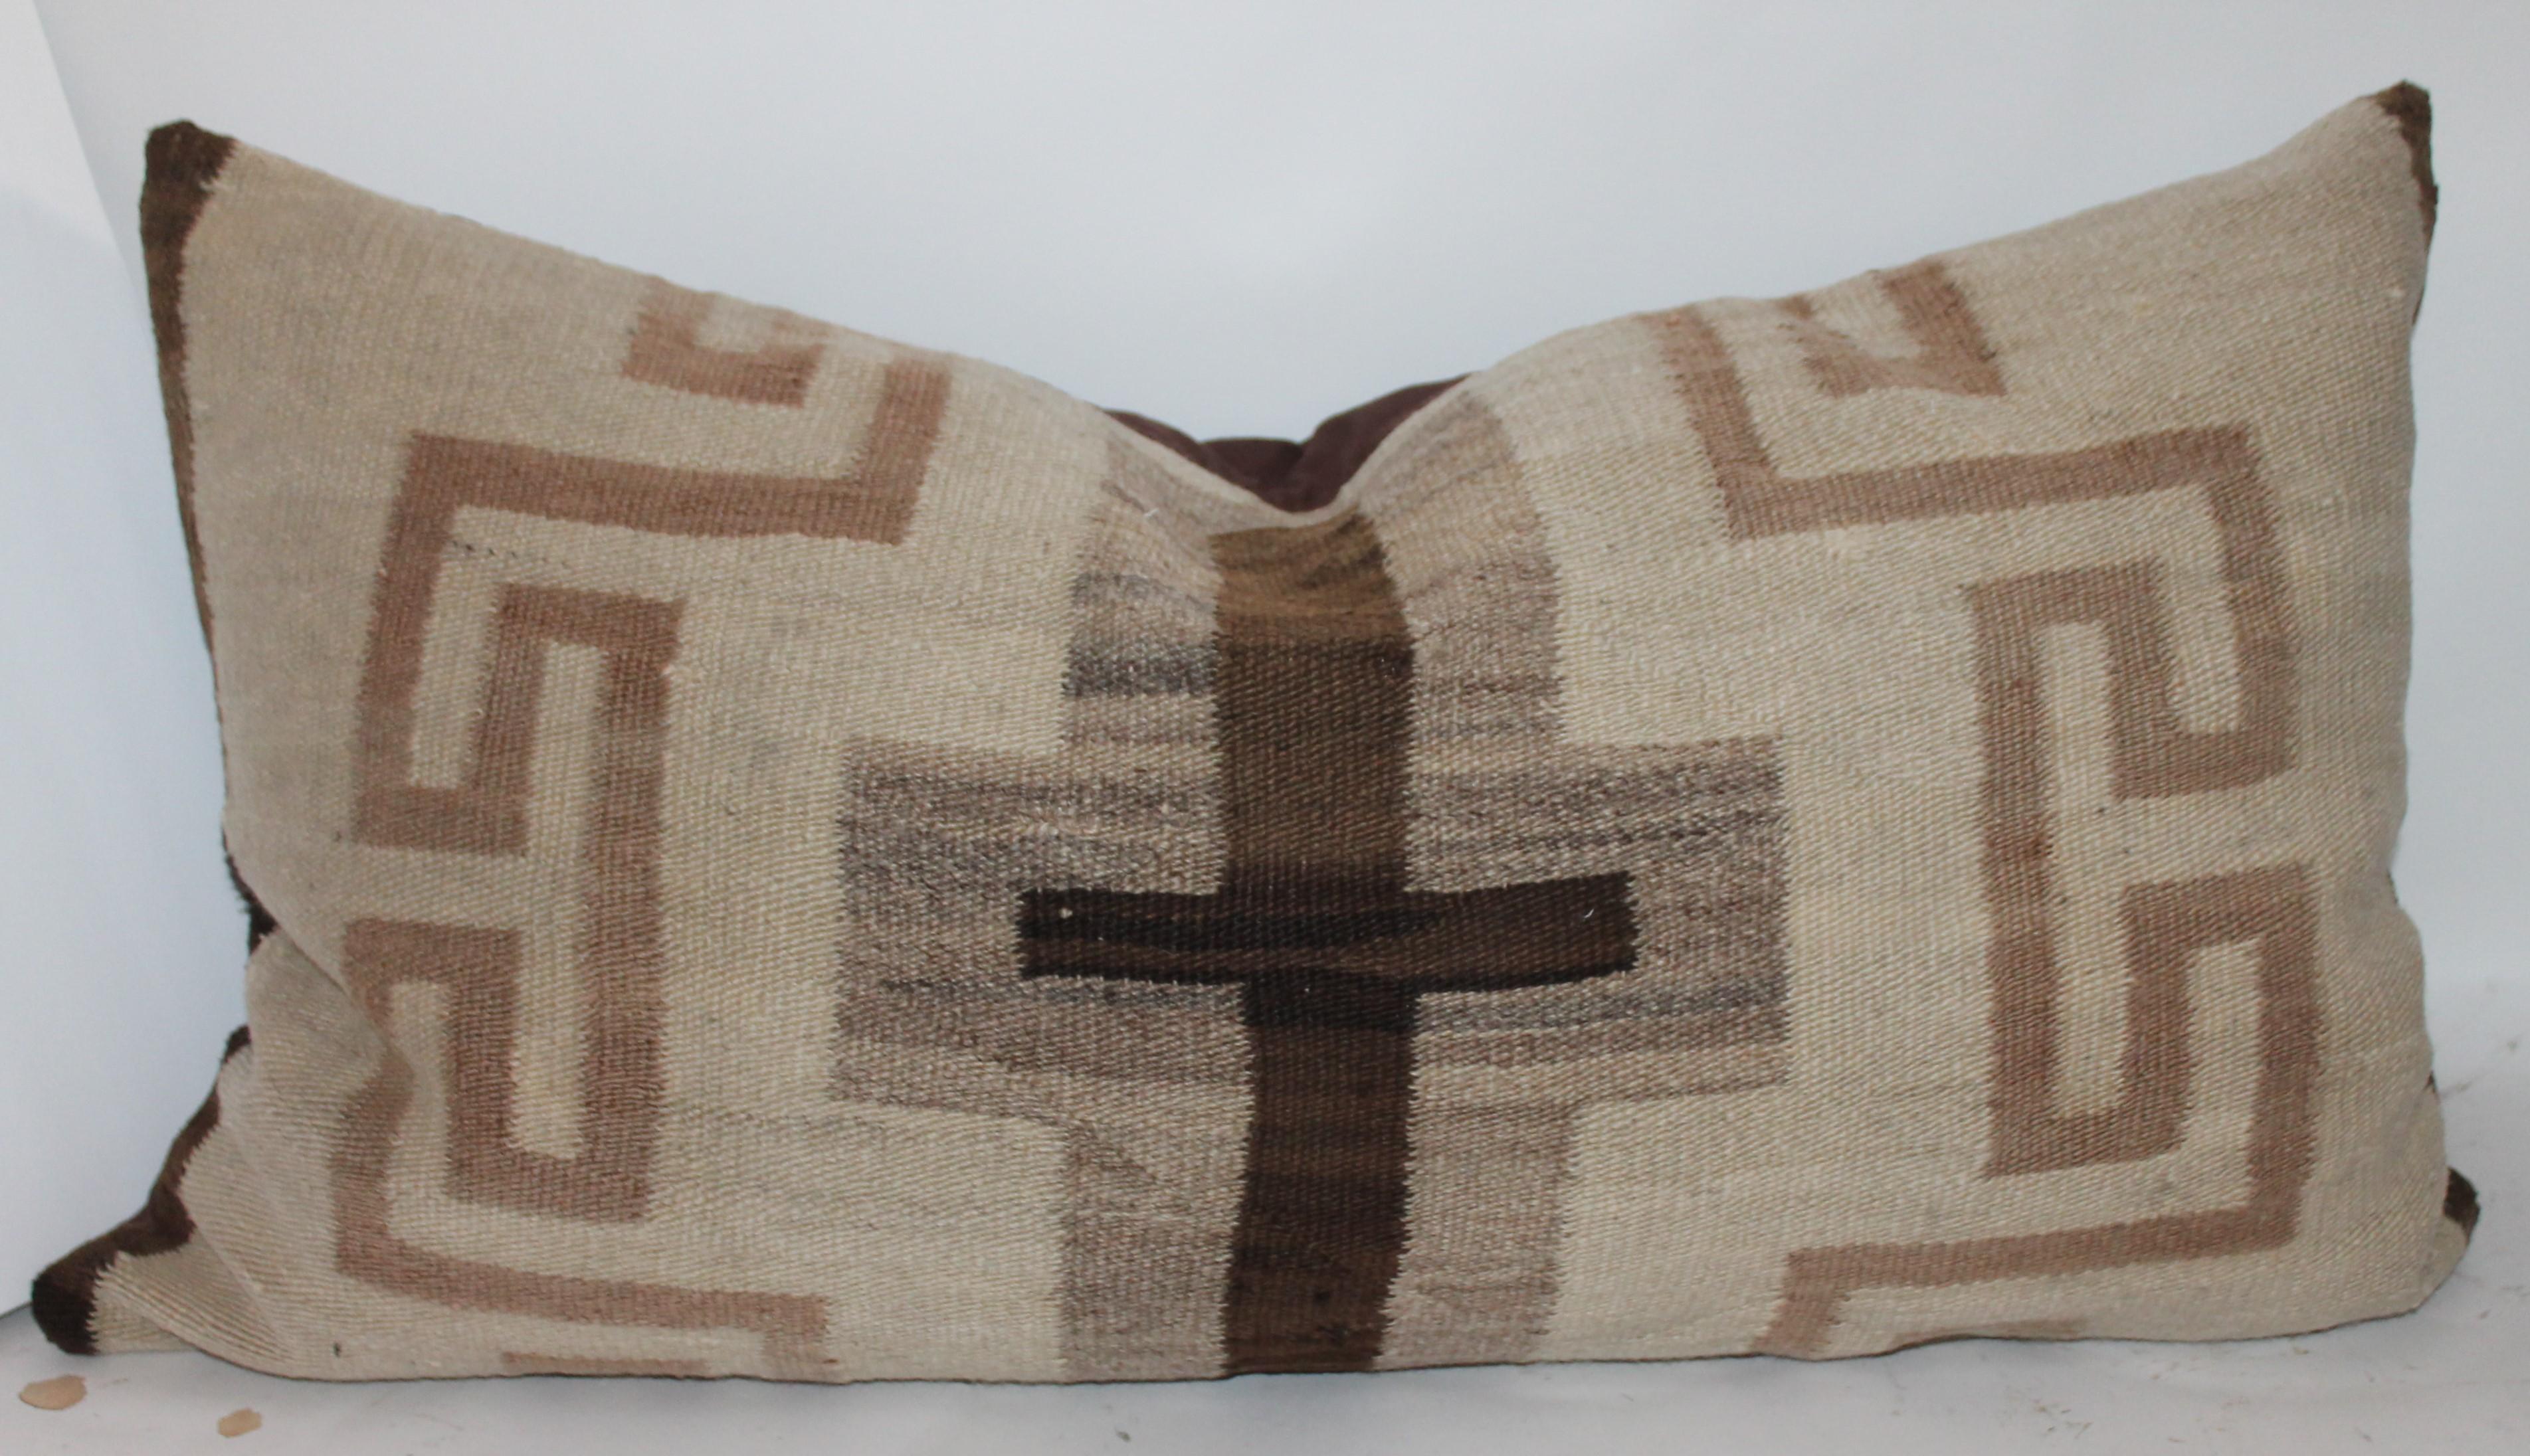 These two amazing and early Navajo Transitional Weaving pillows are in great condition with minor spotting or fade in areas. Sold as a group of two. One is a large cross and other is a geometric bolster. Both pillows were cut by the same